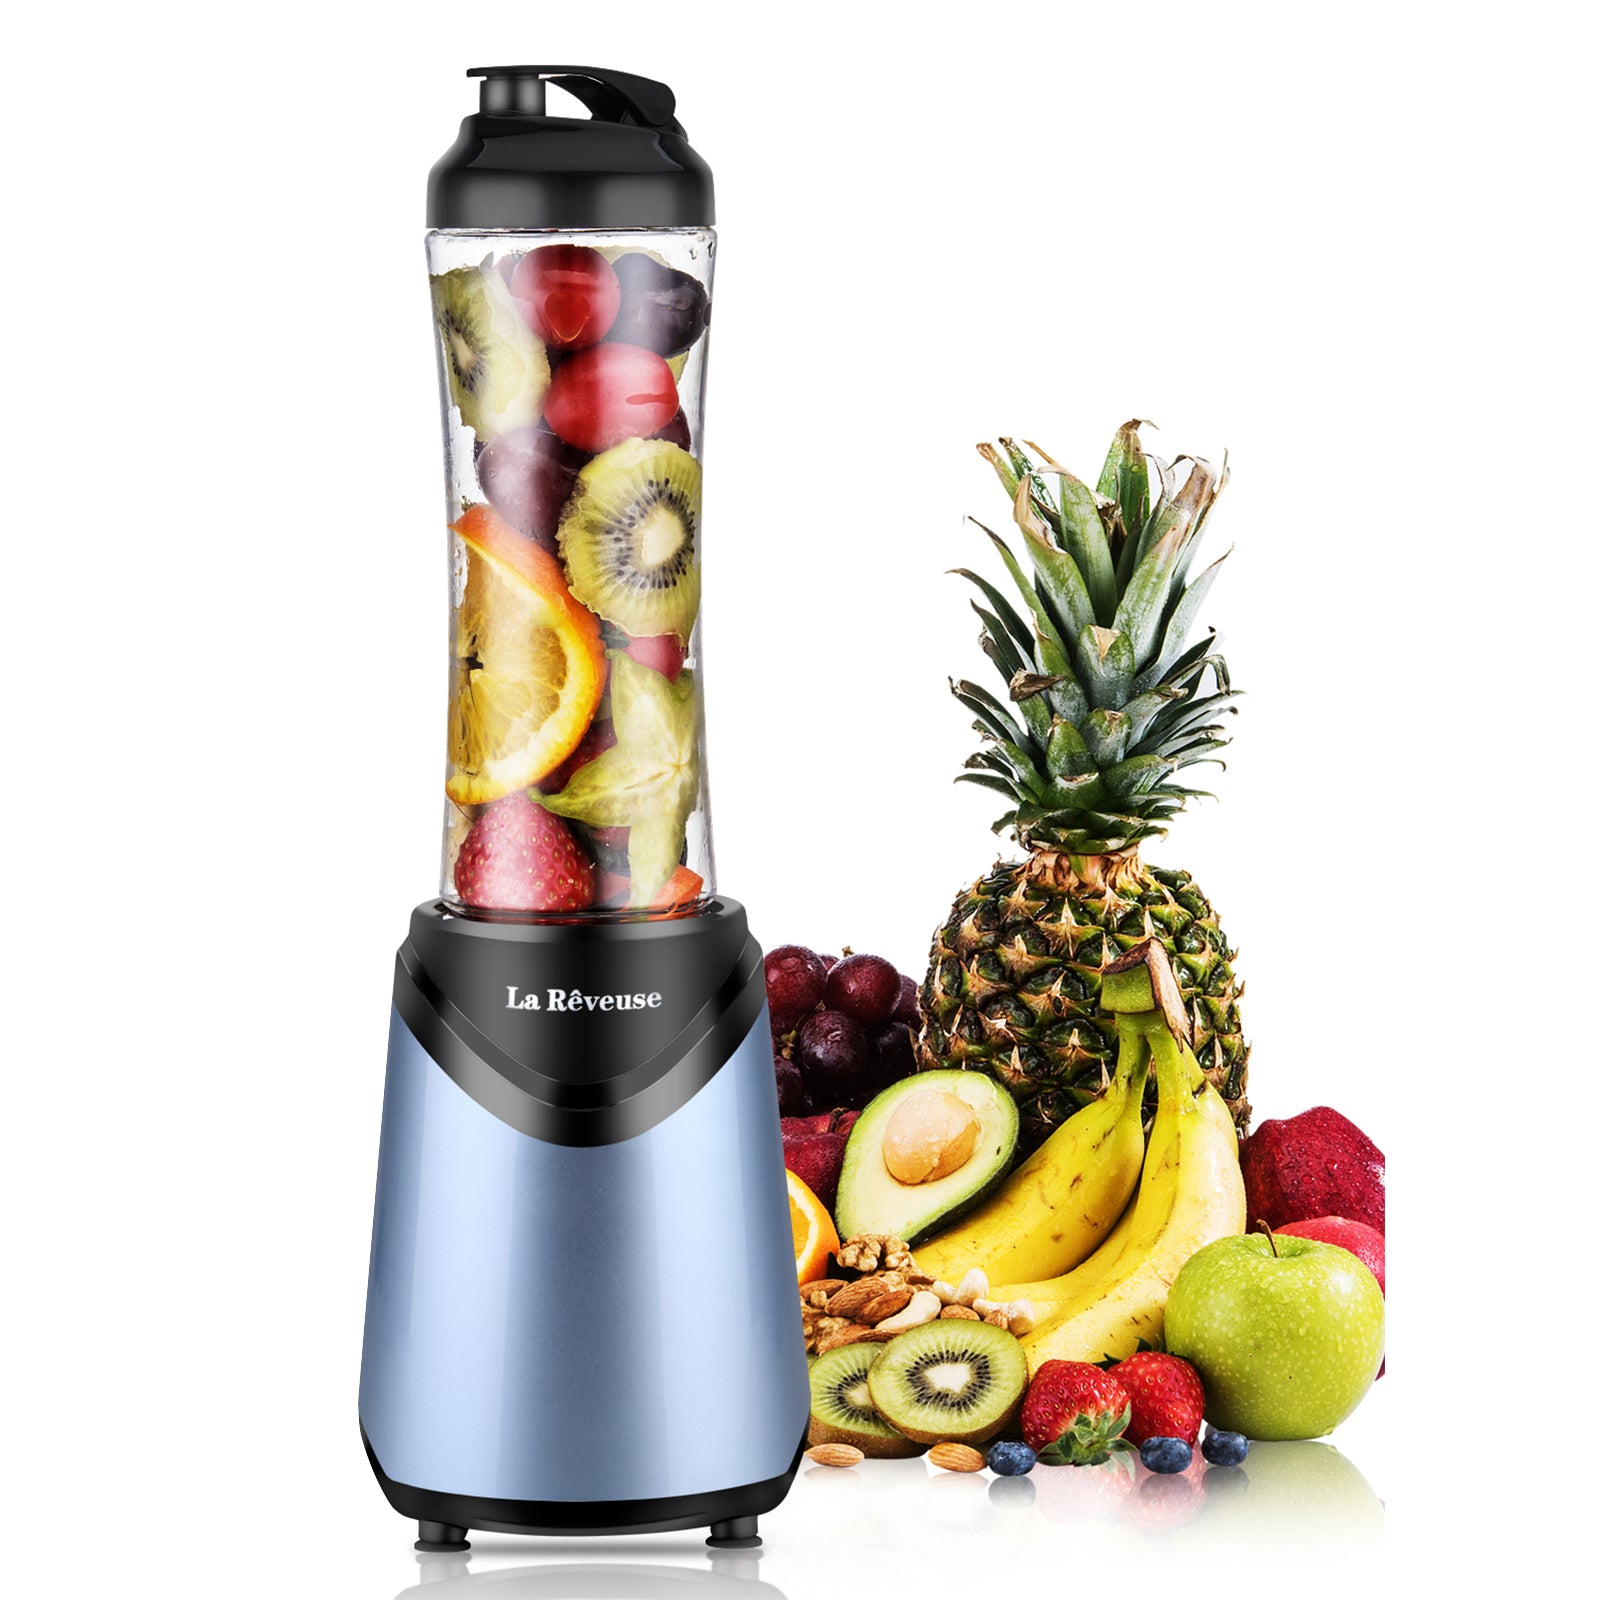 La Reveuse Smoothies Blender Personal Size 300 Watts with 18 oz